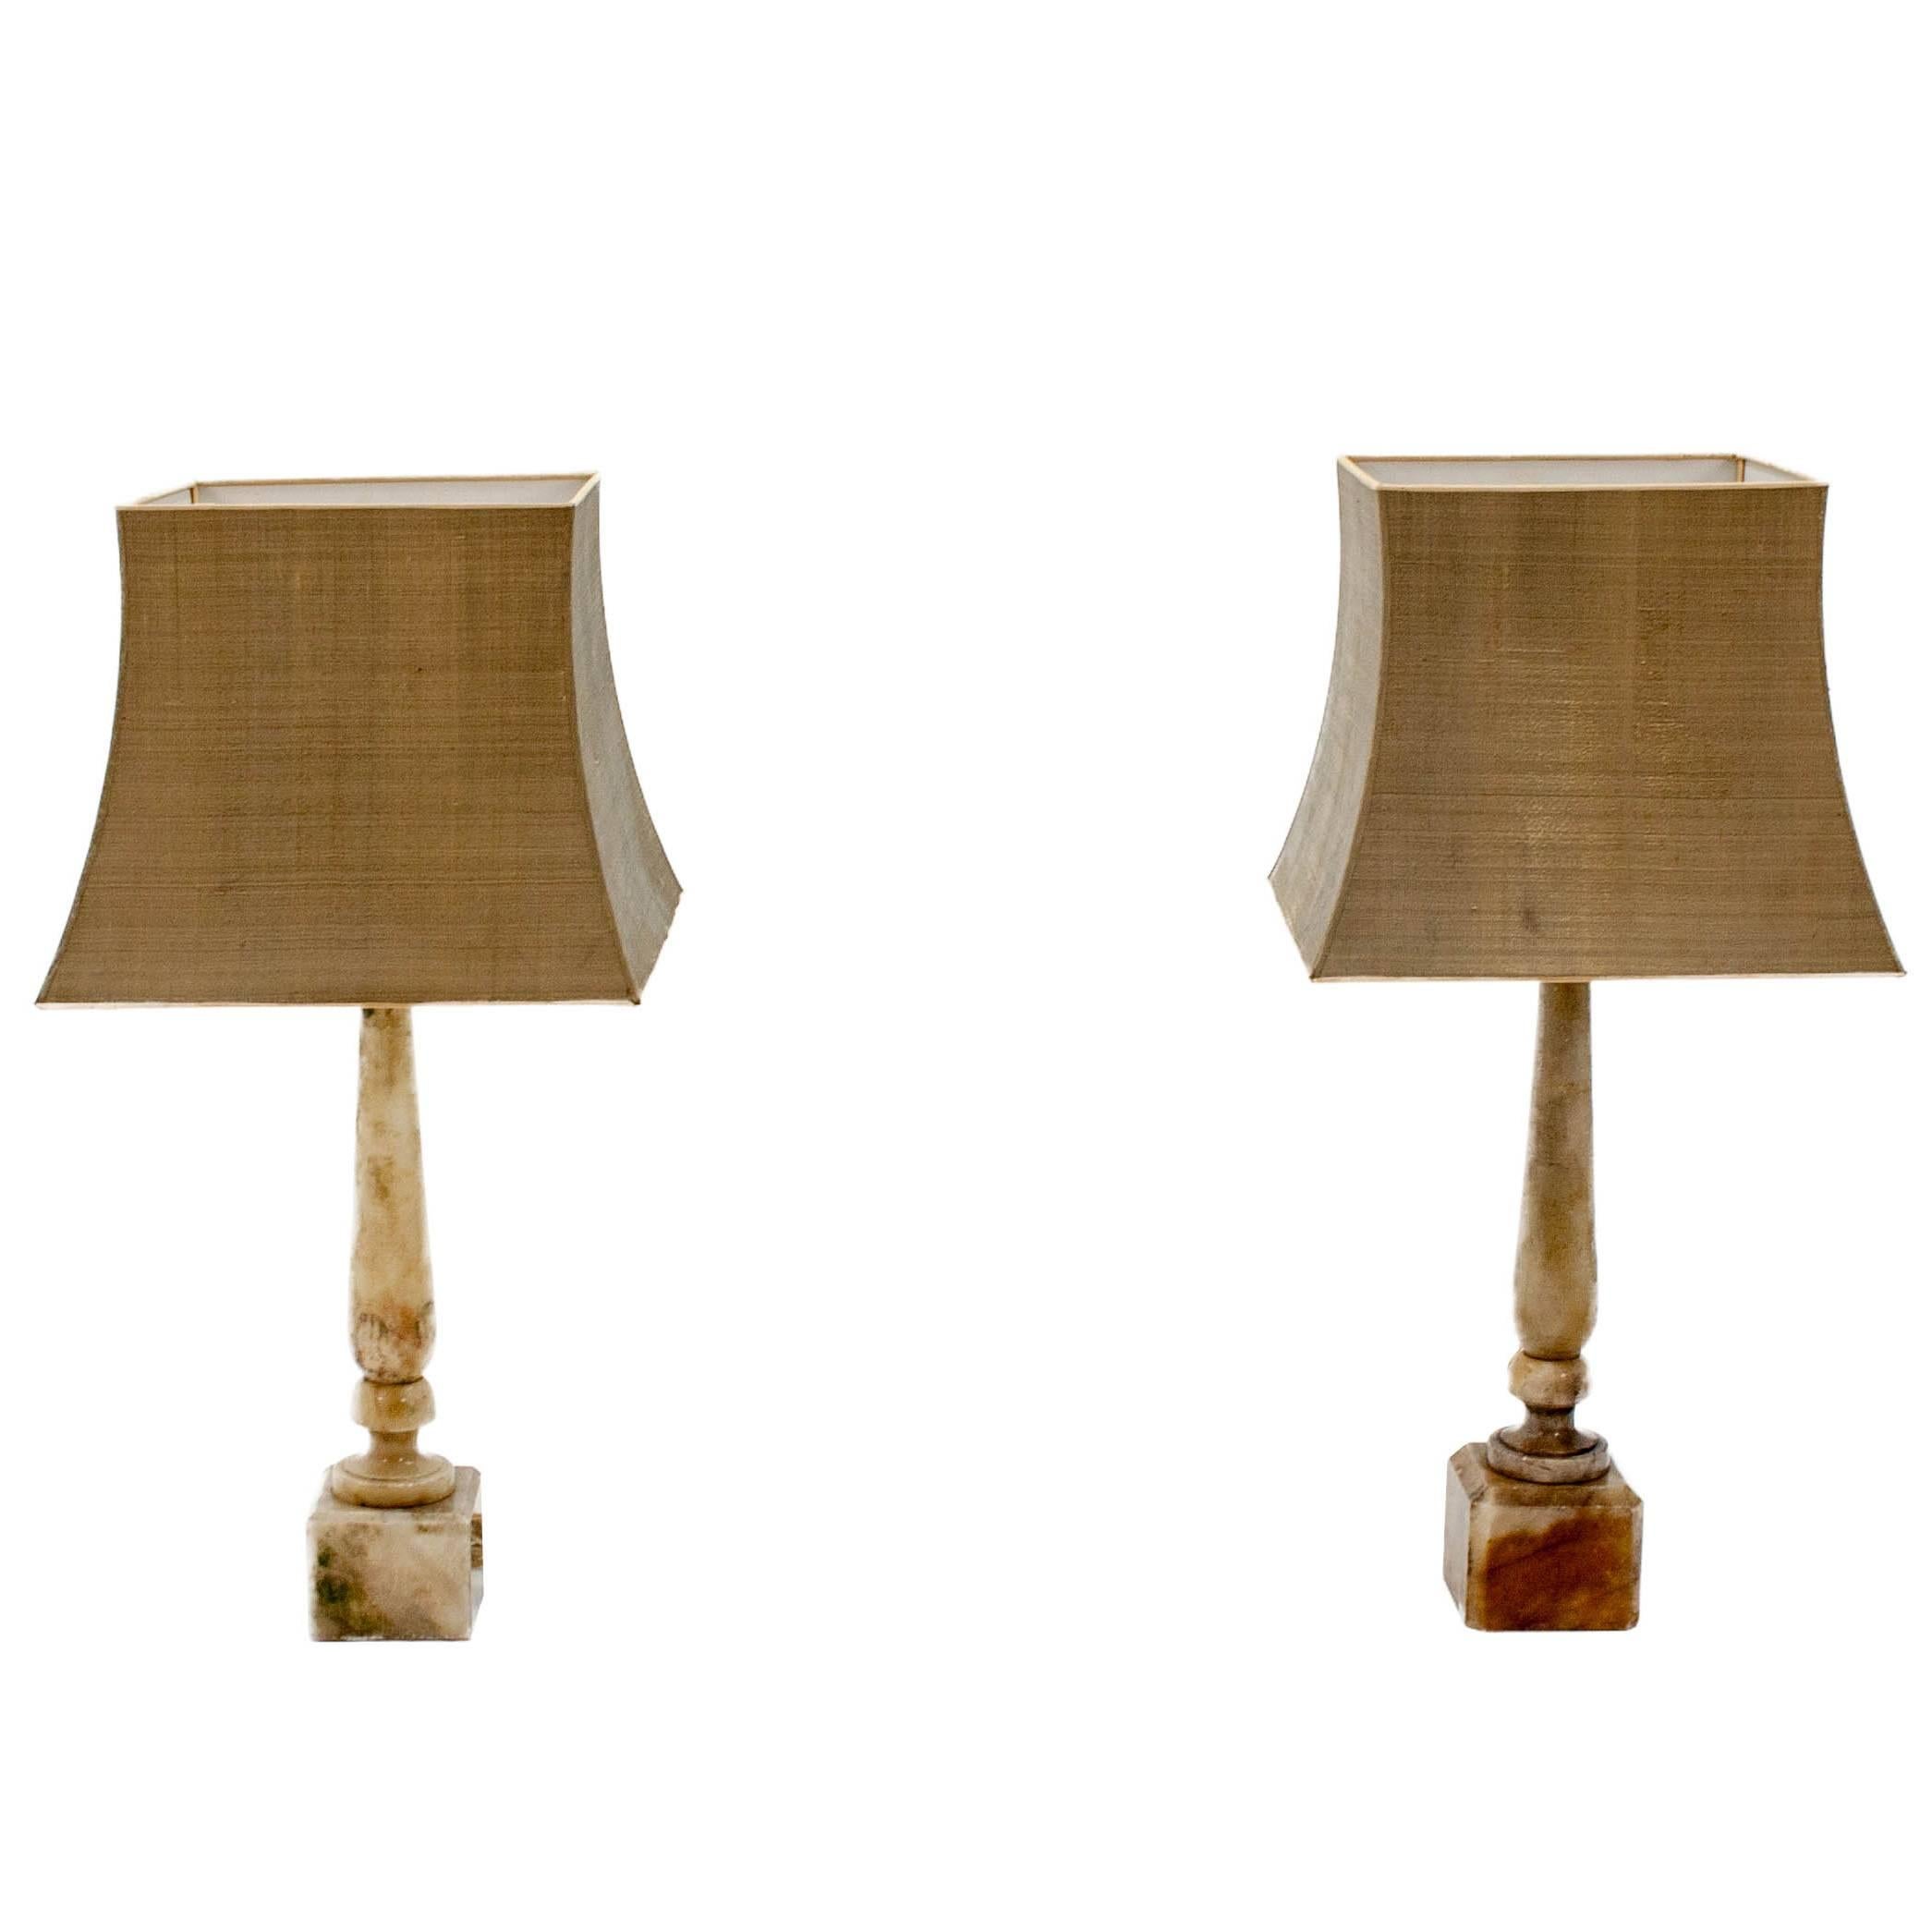 Two Marble Table Lamps